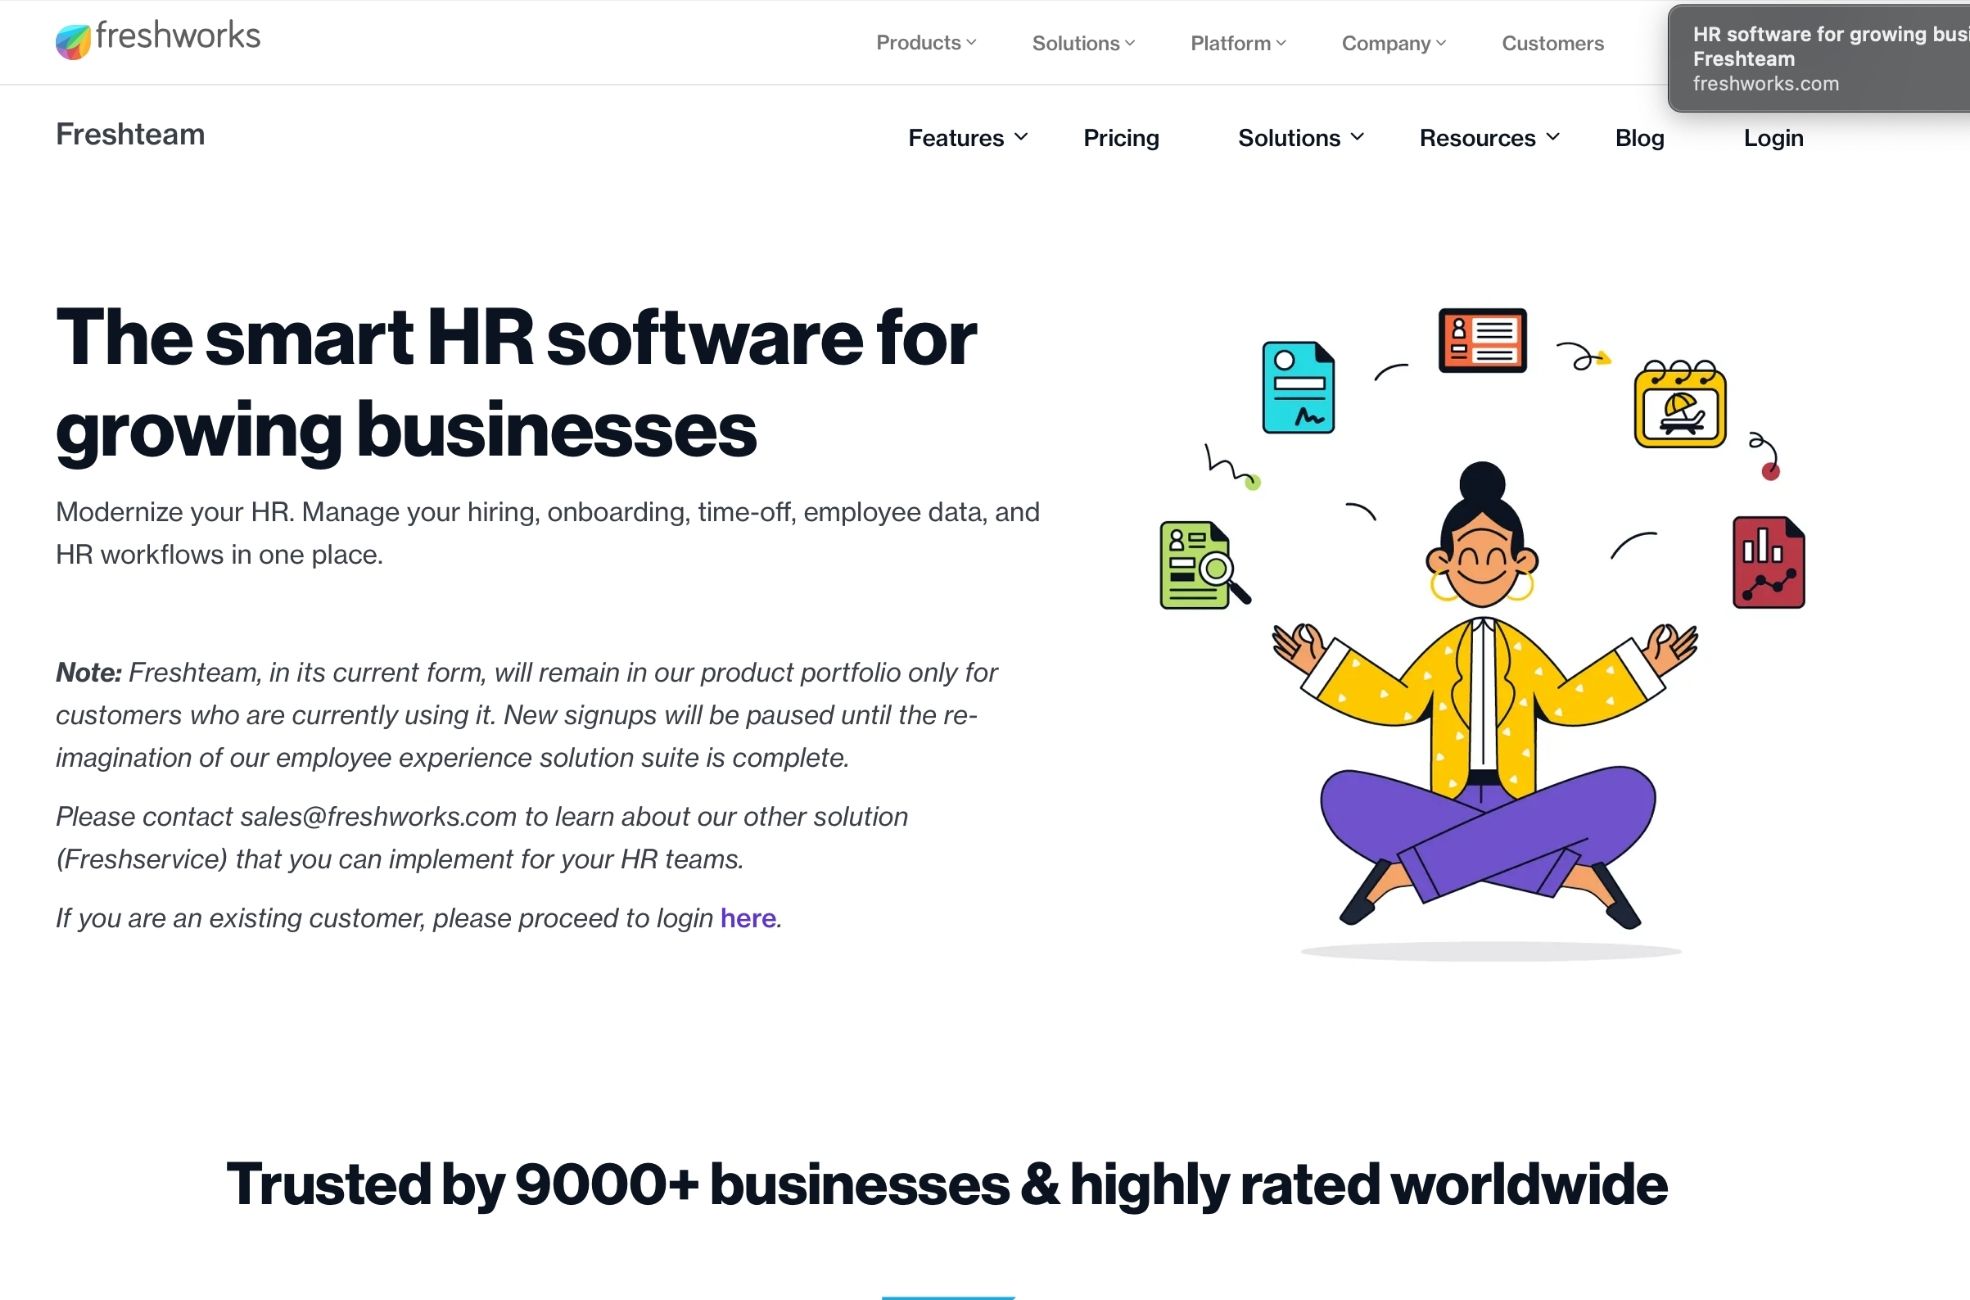 Top 5 HR Software In Nigeria 2023: A Guide For HR Professionals